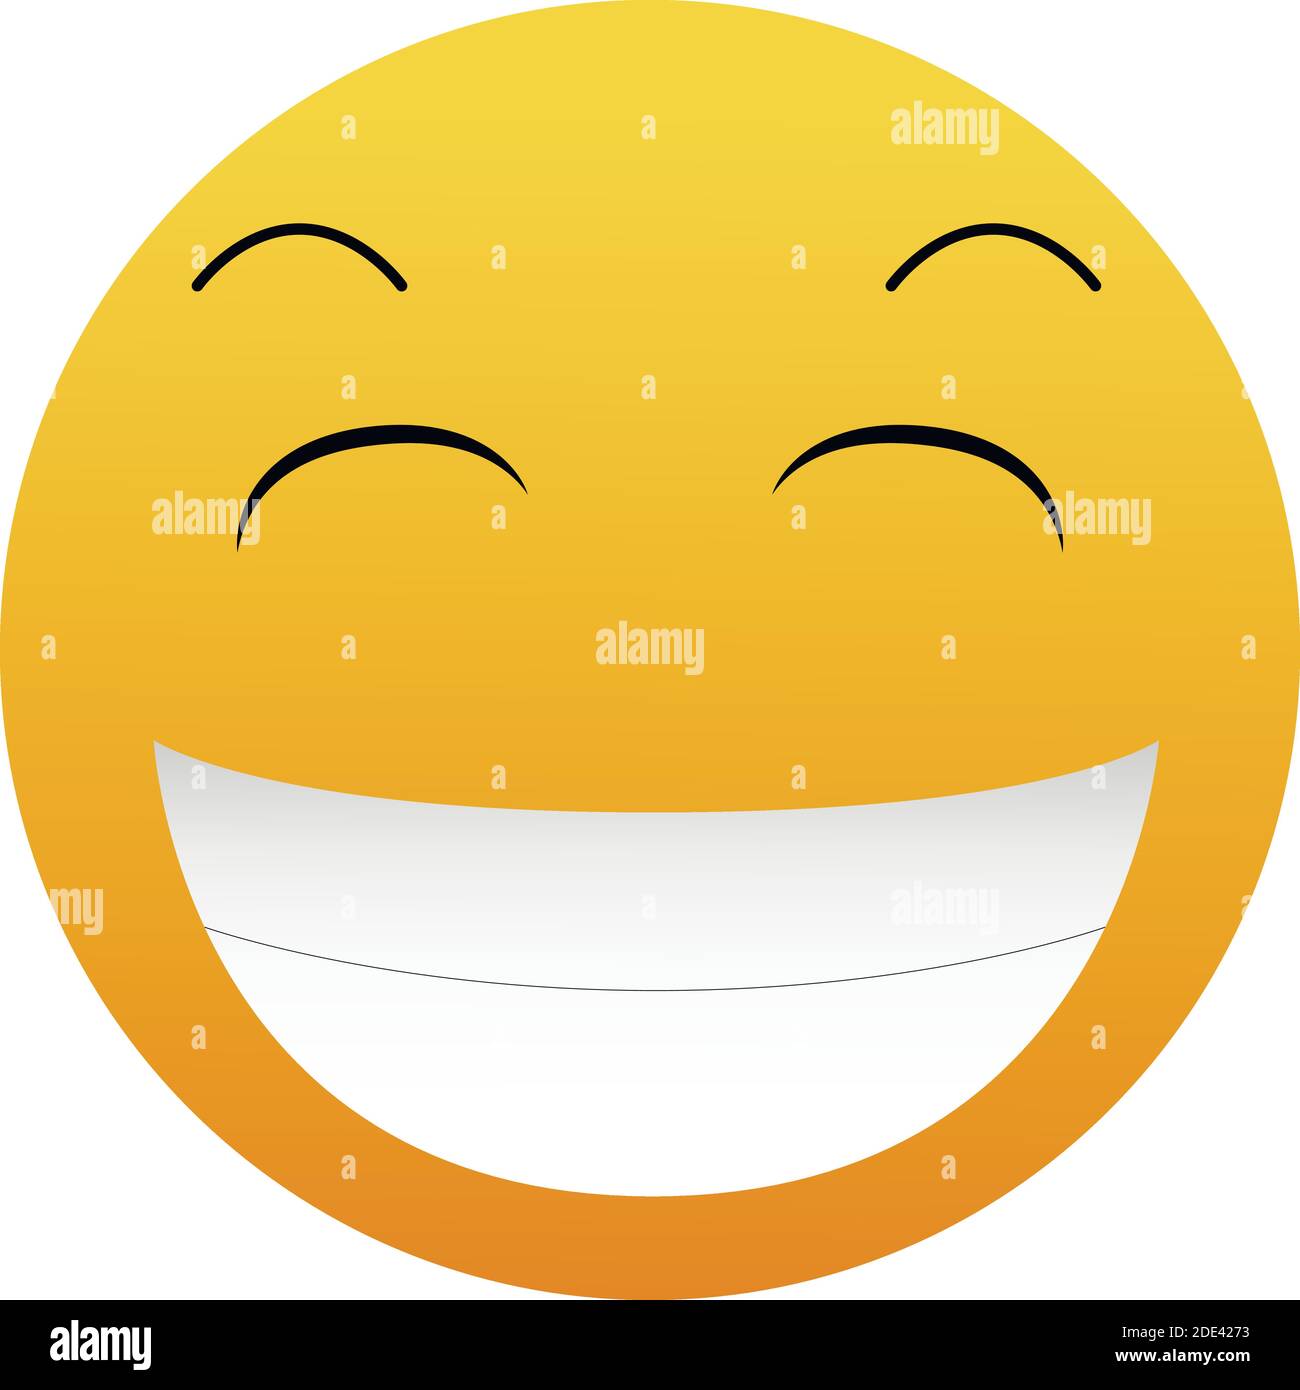 Smiling emoticon with happy eyes. Yellow face with a broad, open smile, showing upper teeth. Stock Vector